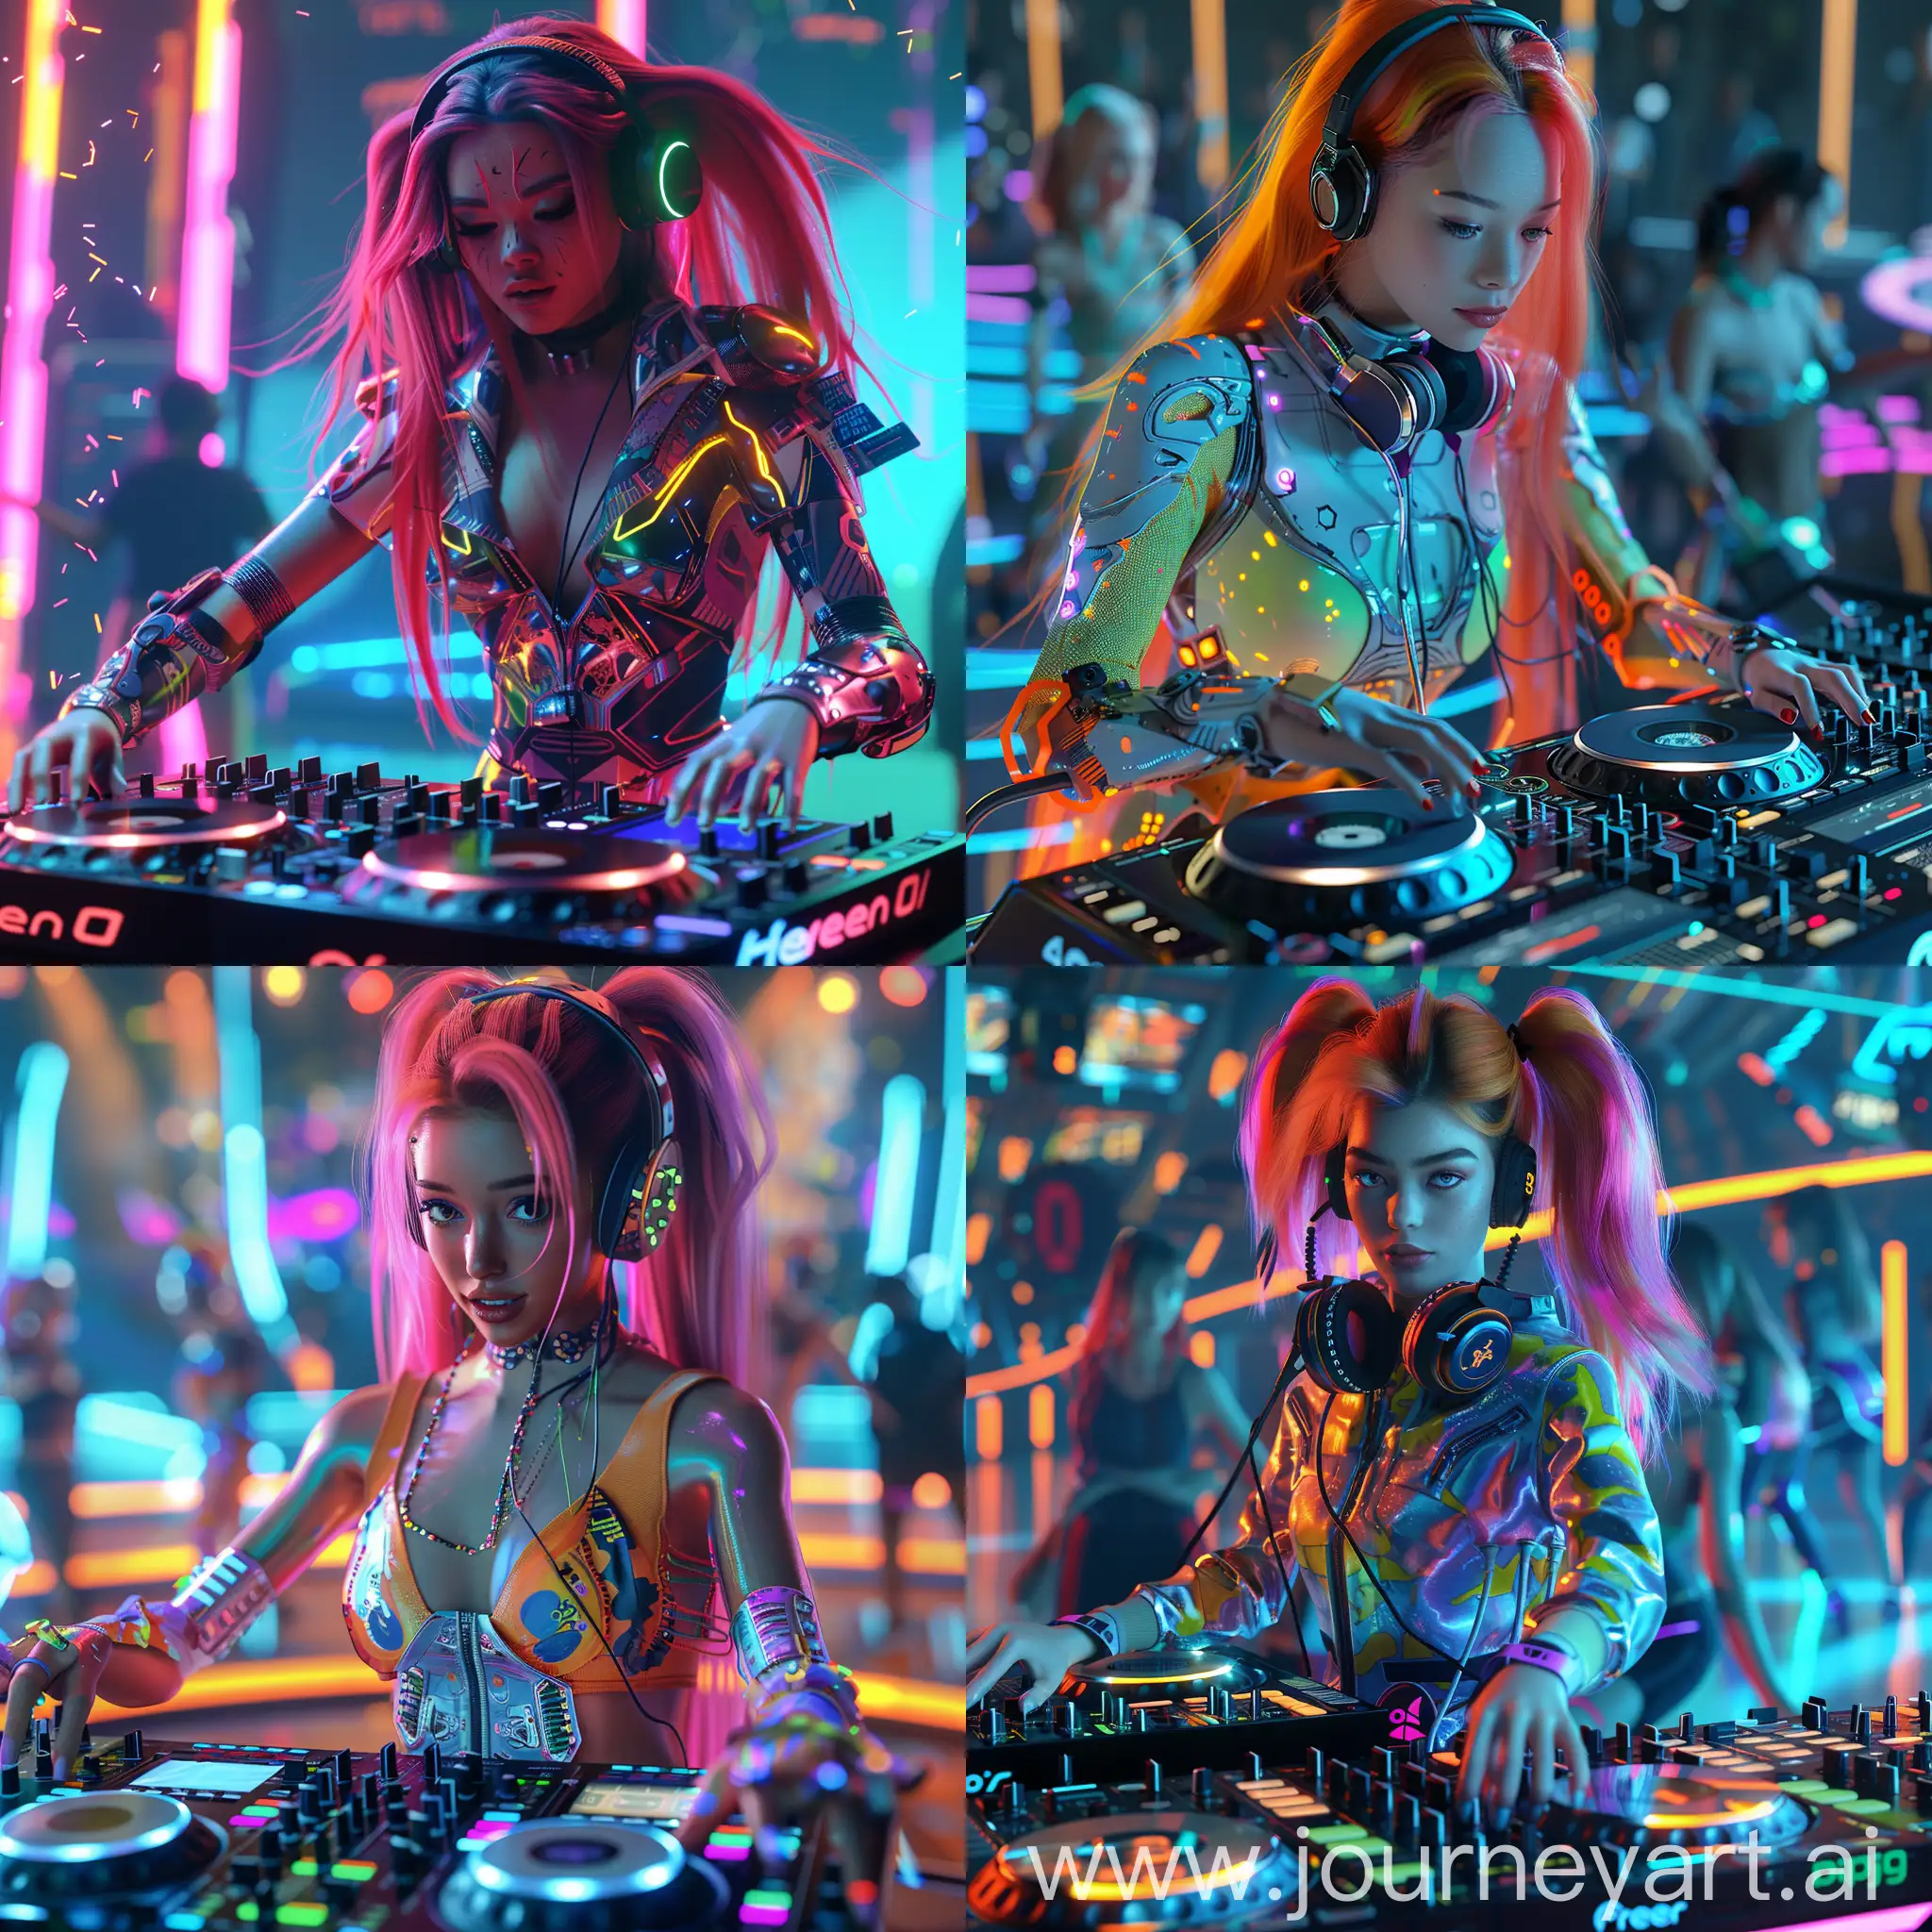 Create vibrant, high-resolution 4K image, full-screen 16:9, hyper-detailed, octane render, ray-tracing, blender, hyper-detailed, a stunningly beautiful girl DJ at the console with bright hair and futuristic clothing for the background of a dancing peoples